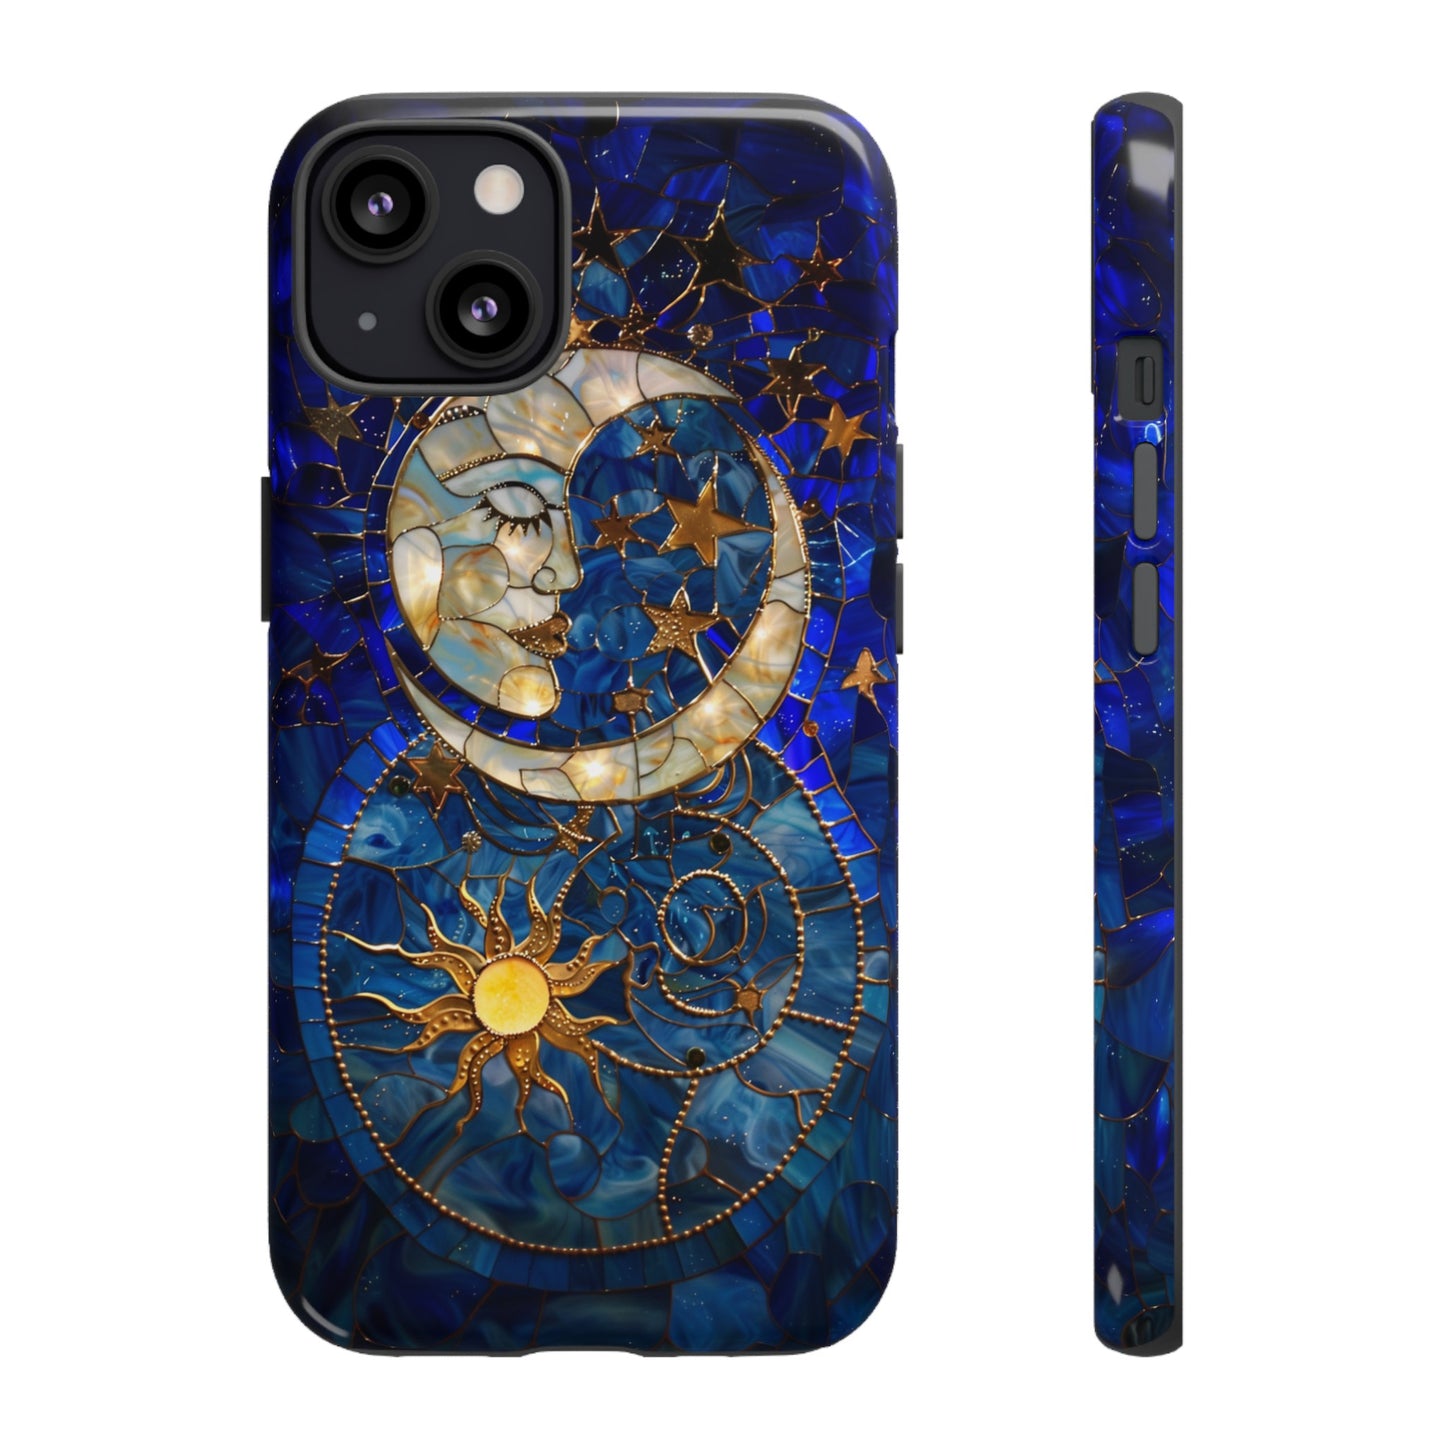 Best iPhone cases with celestial stained glass design